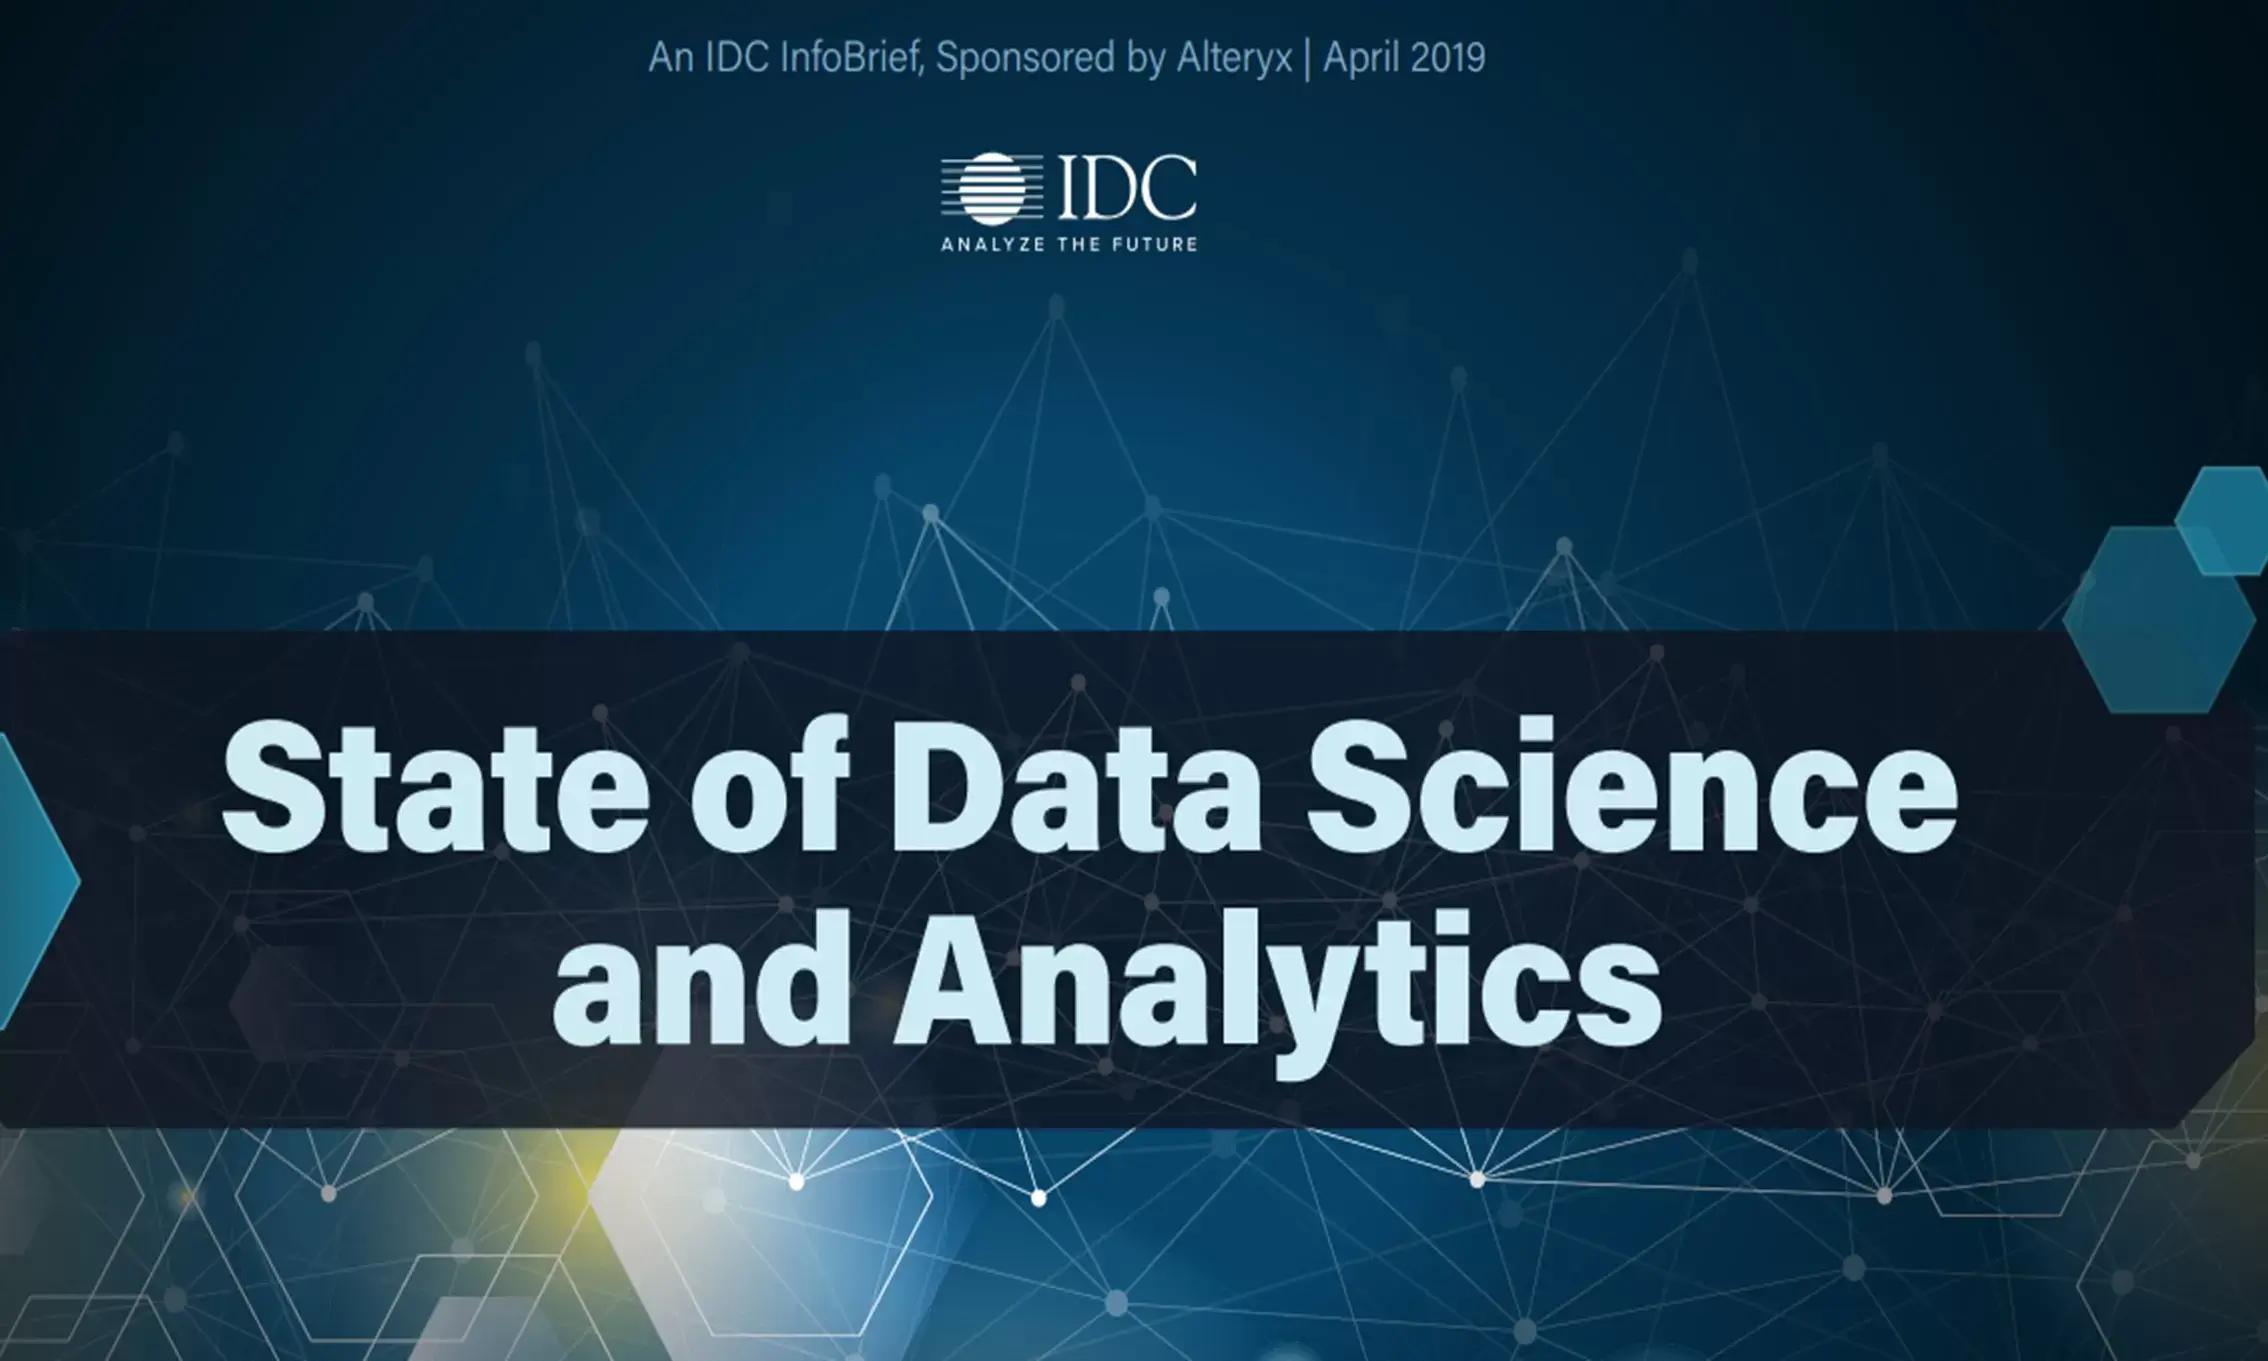 IDC Infobrief: State of Data Science and Analytics